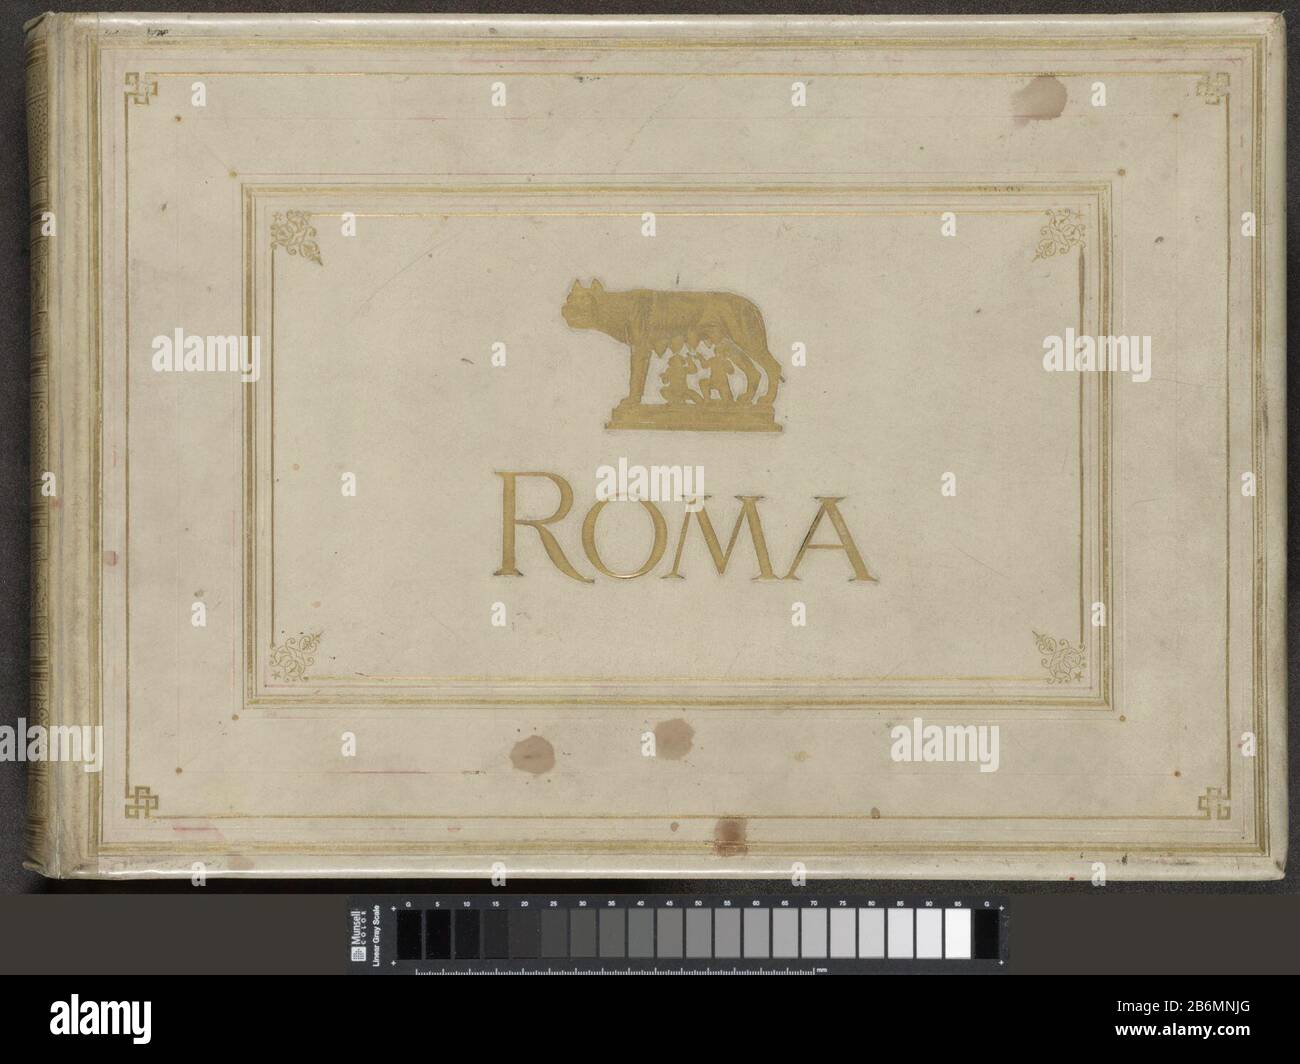 Fotoalbum met opnames van bezienswaardigheden en kunstwerken in Rome Roma  (titel op object) Photo album in the band of parchment. On the front cover  the title and an image of Romulus and